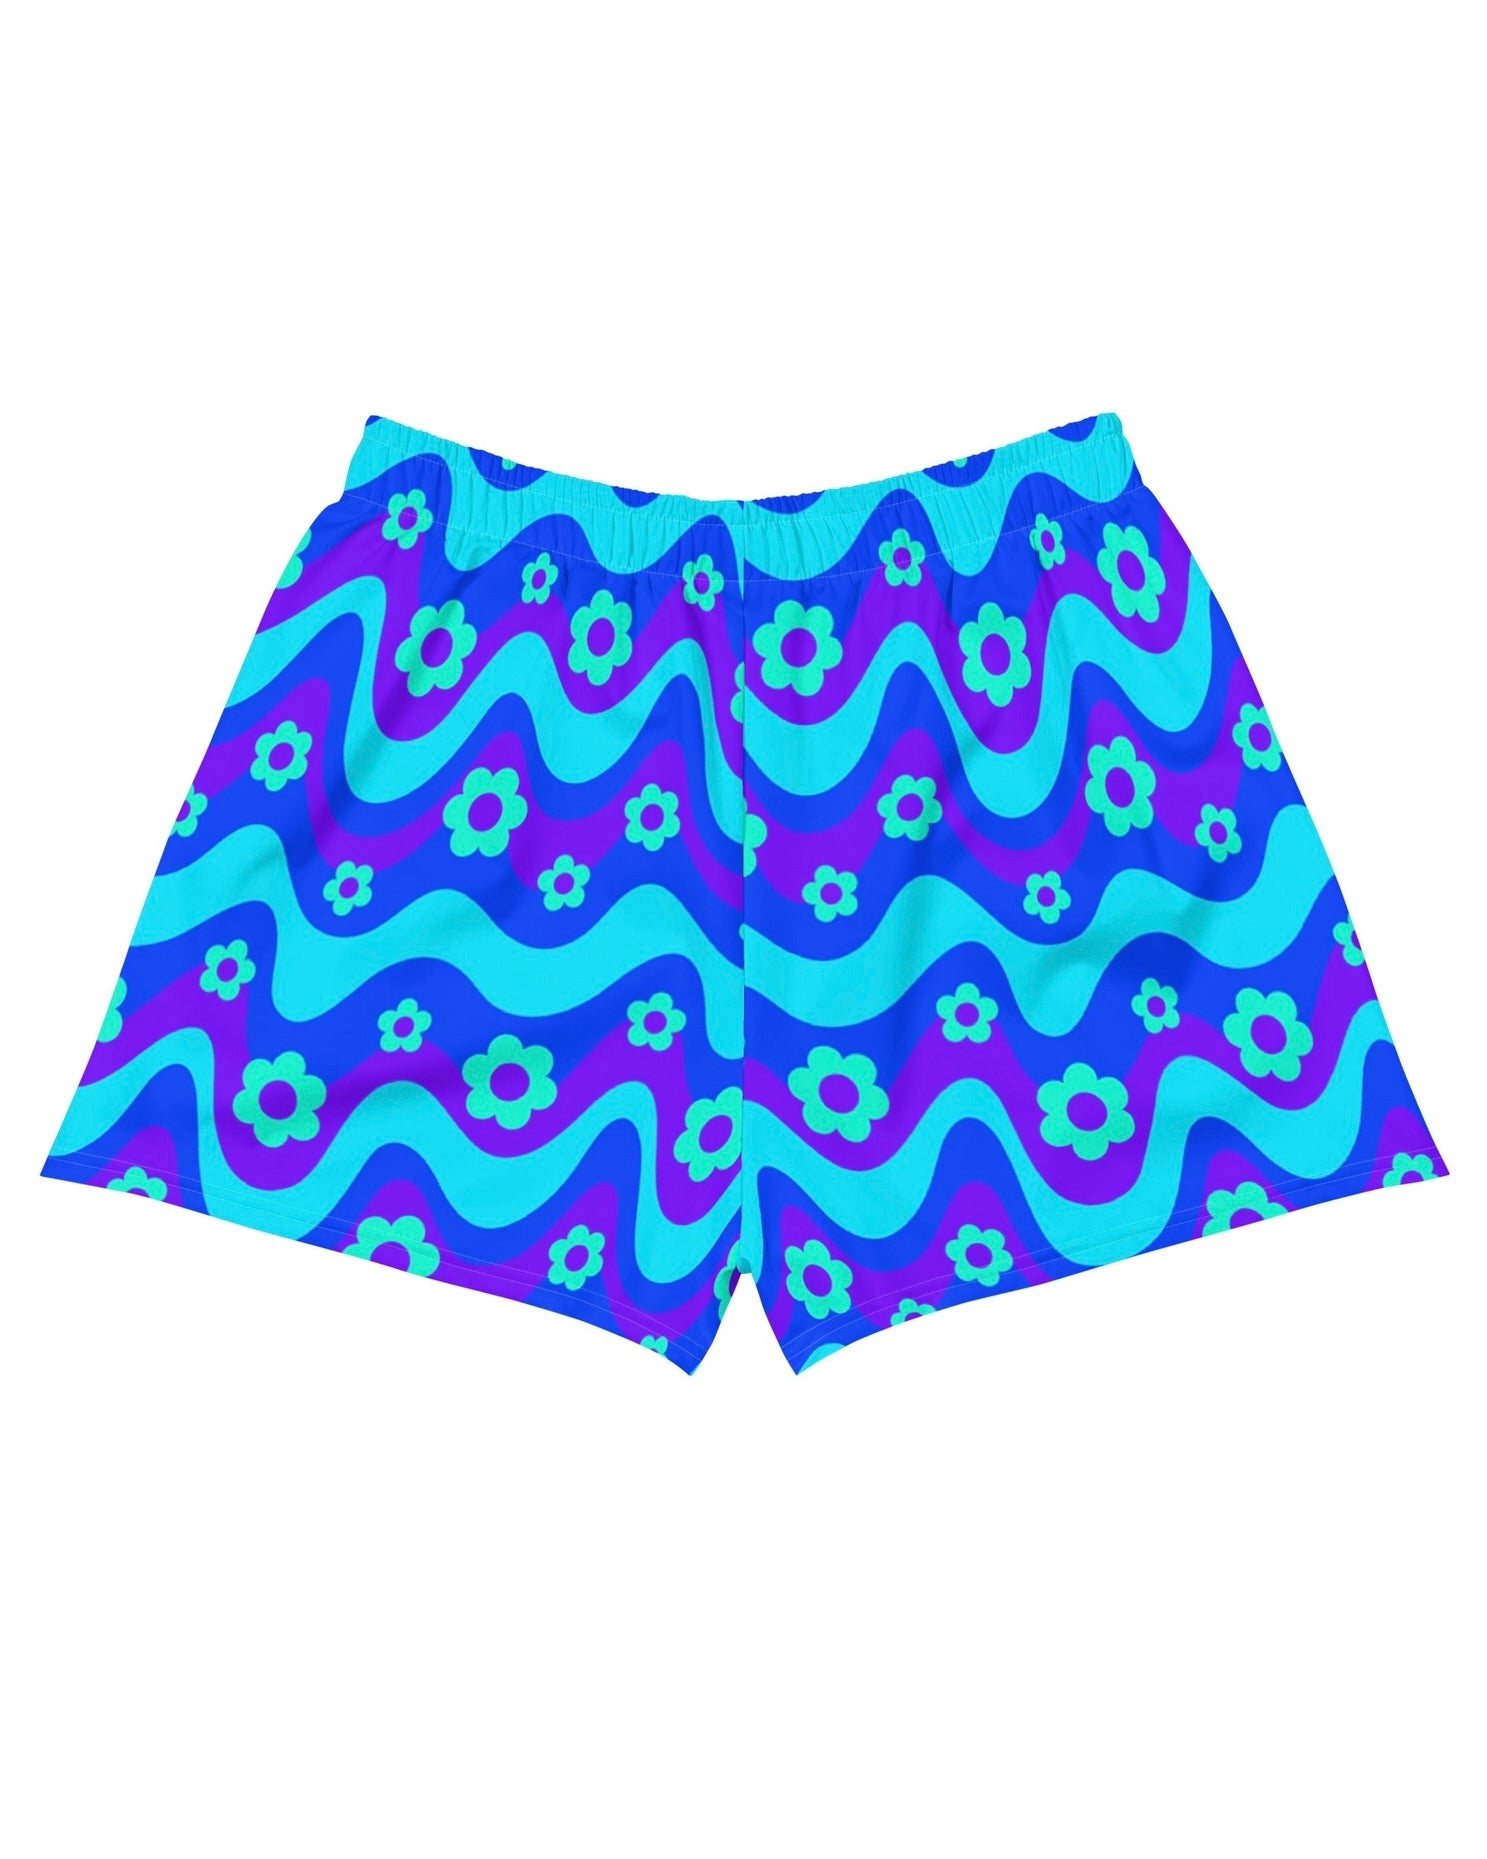 Flower Power Blue Recycled Shorts, Athletic Shorts, - One Stop Rave